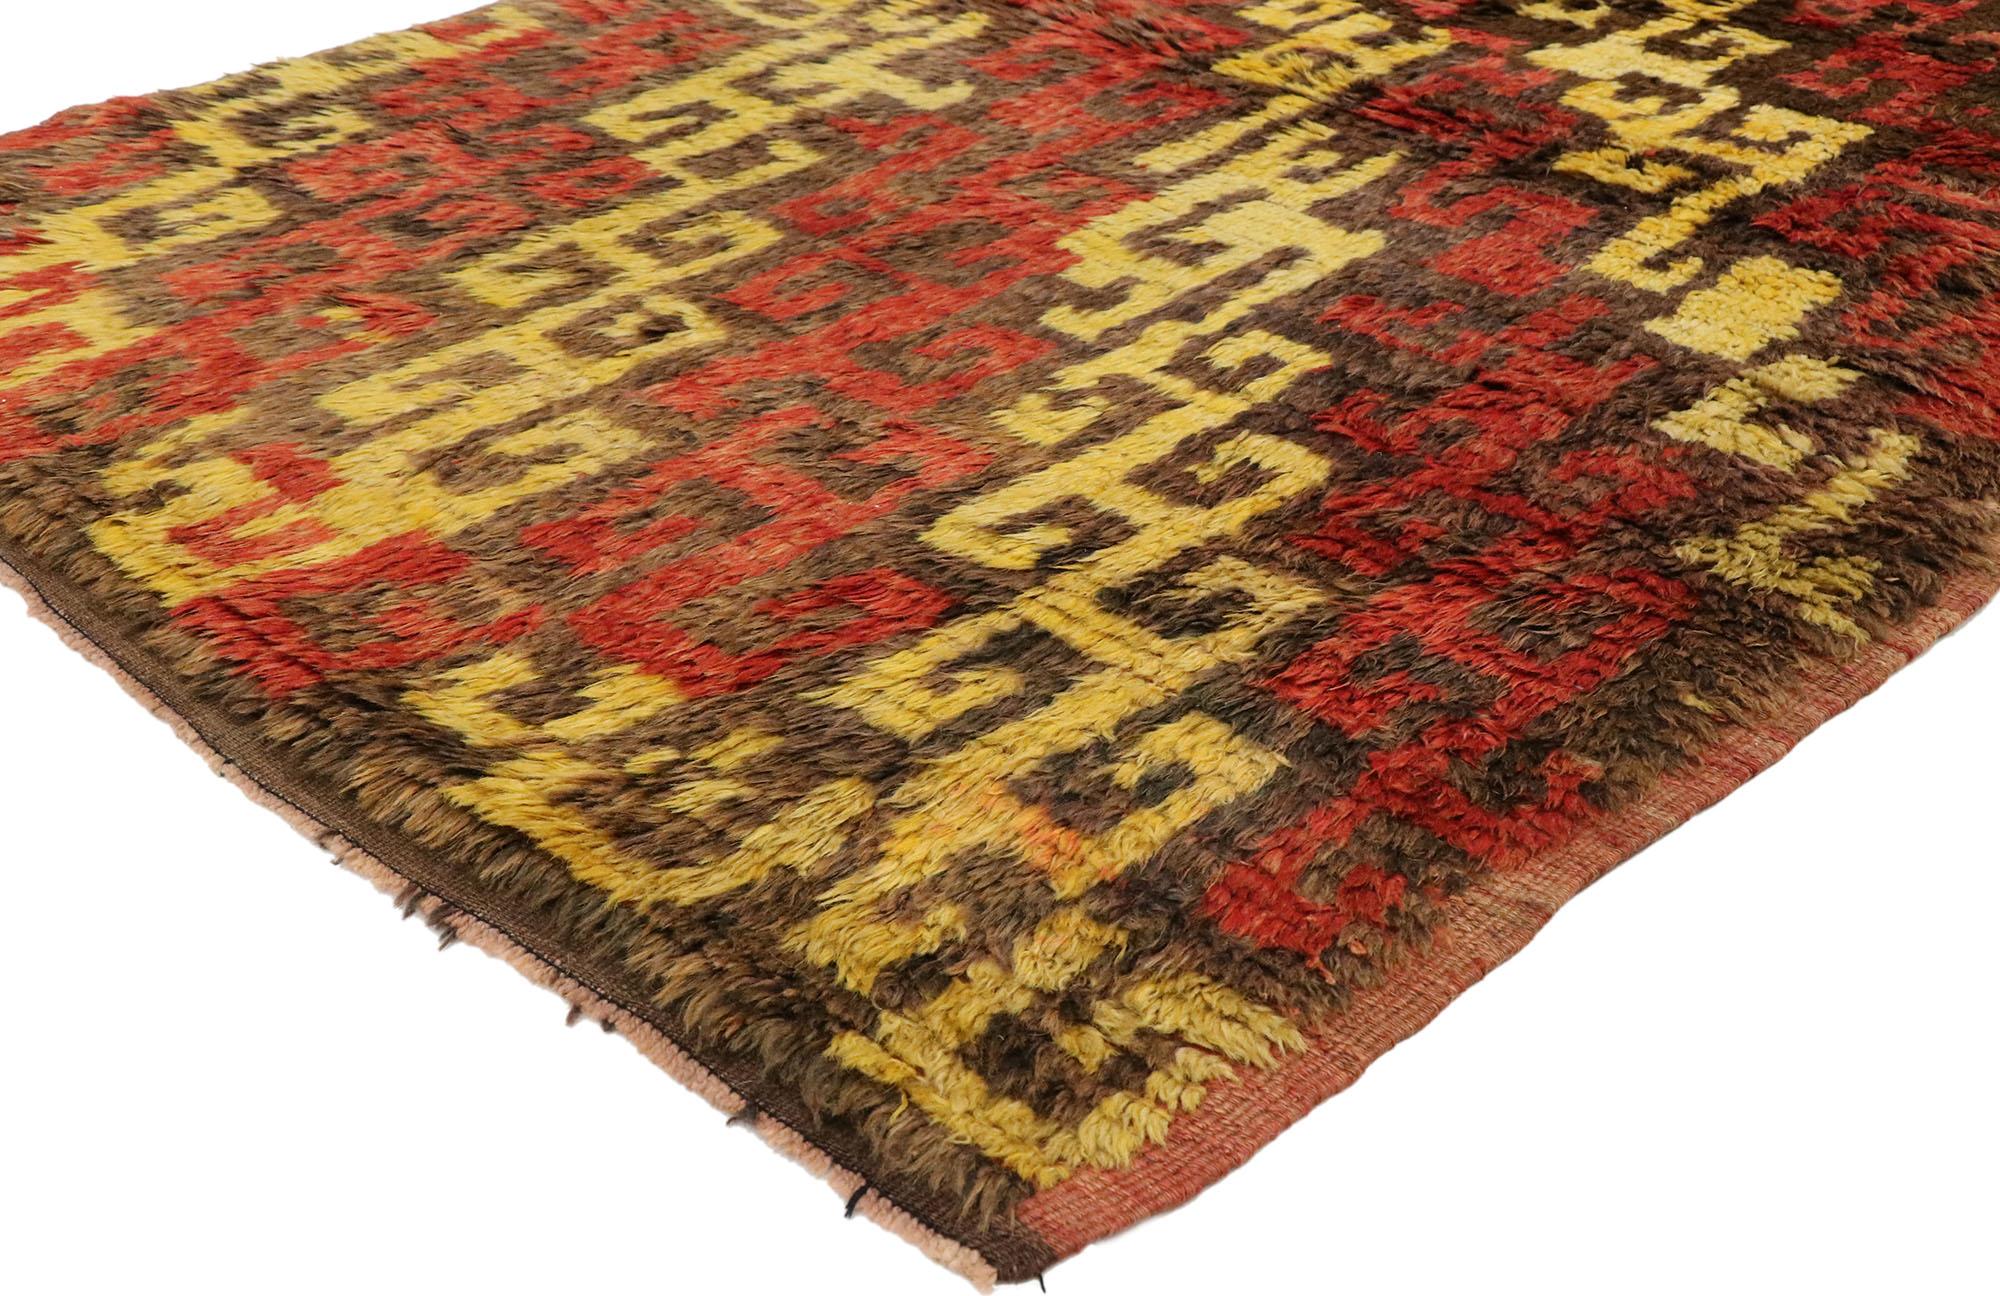 51556, vintage Turkish Tulu accent rug with Mid-Century Modern Tribal style. This hand knotted wool distressed vintage Turkish Tulu rug with Mid-Century Modern and Tribal style is composed of diagonal rows of Ram's Horn motifs in alternating colors